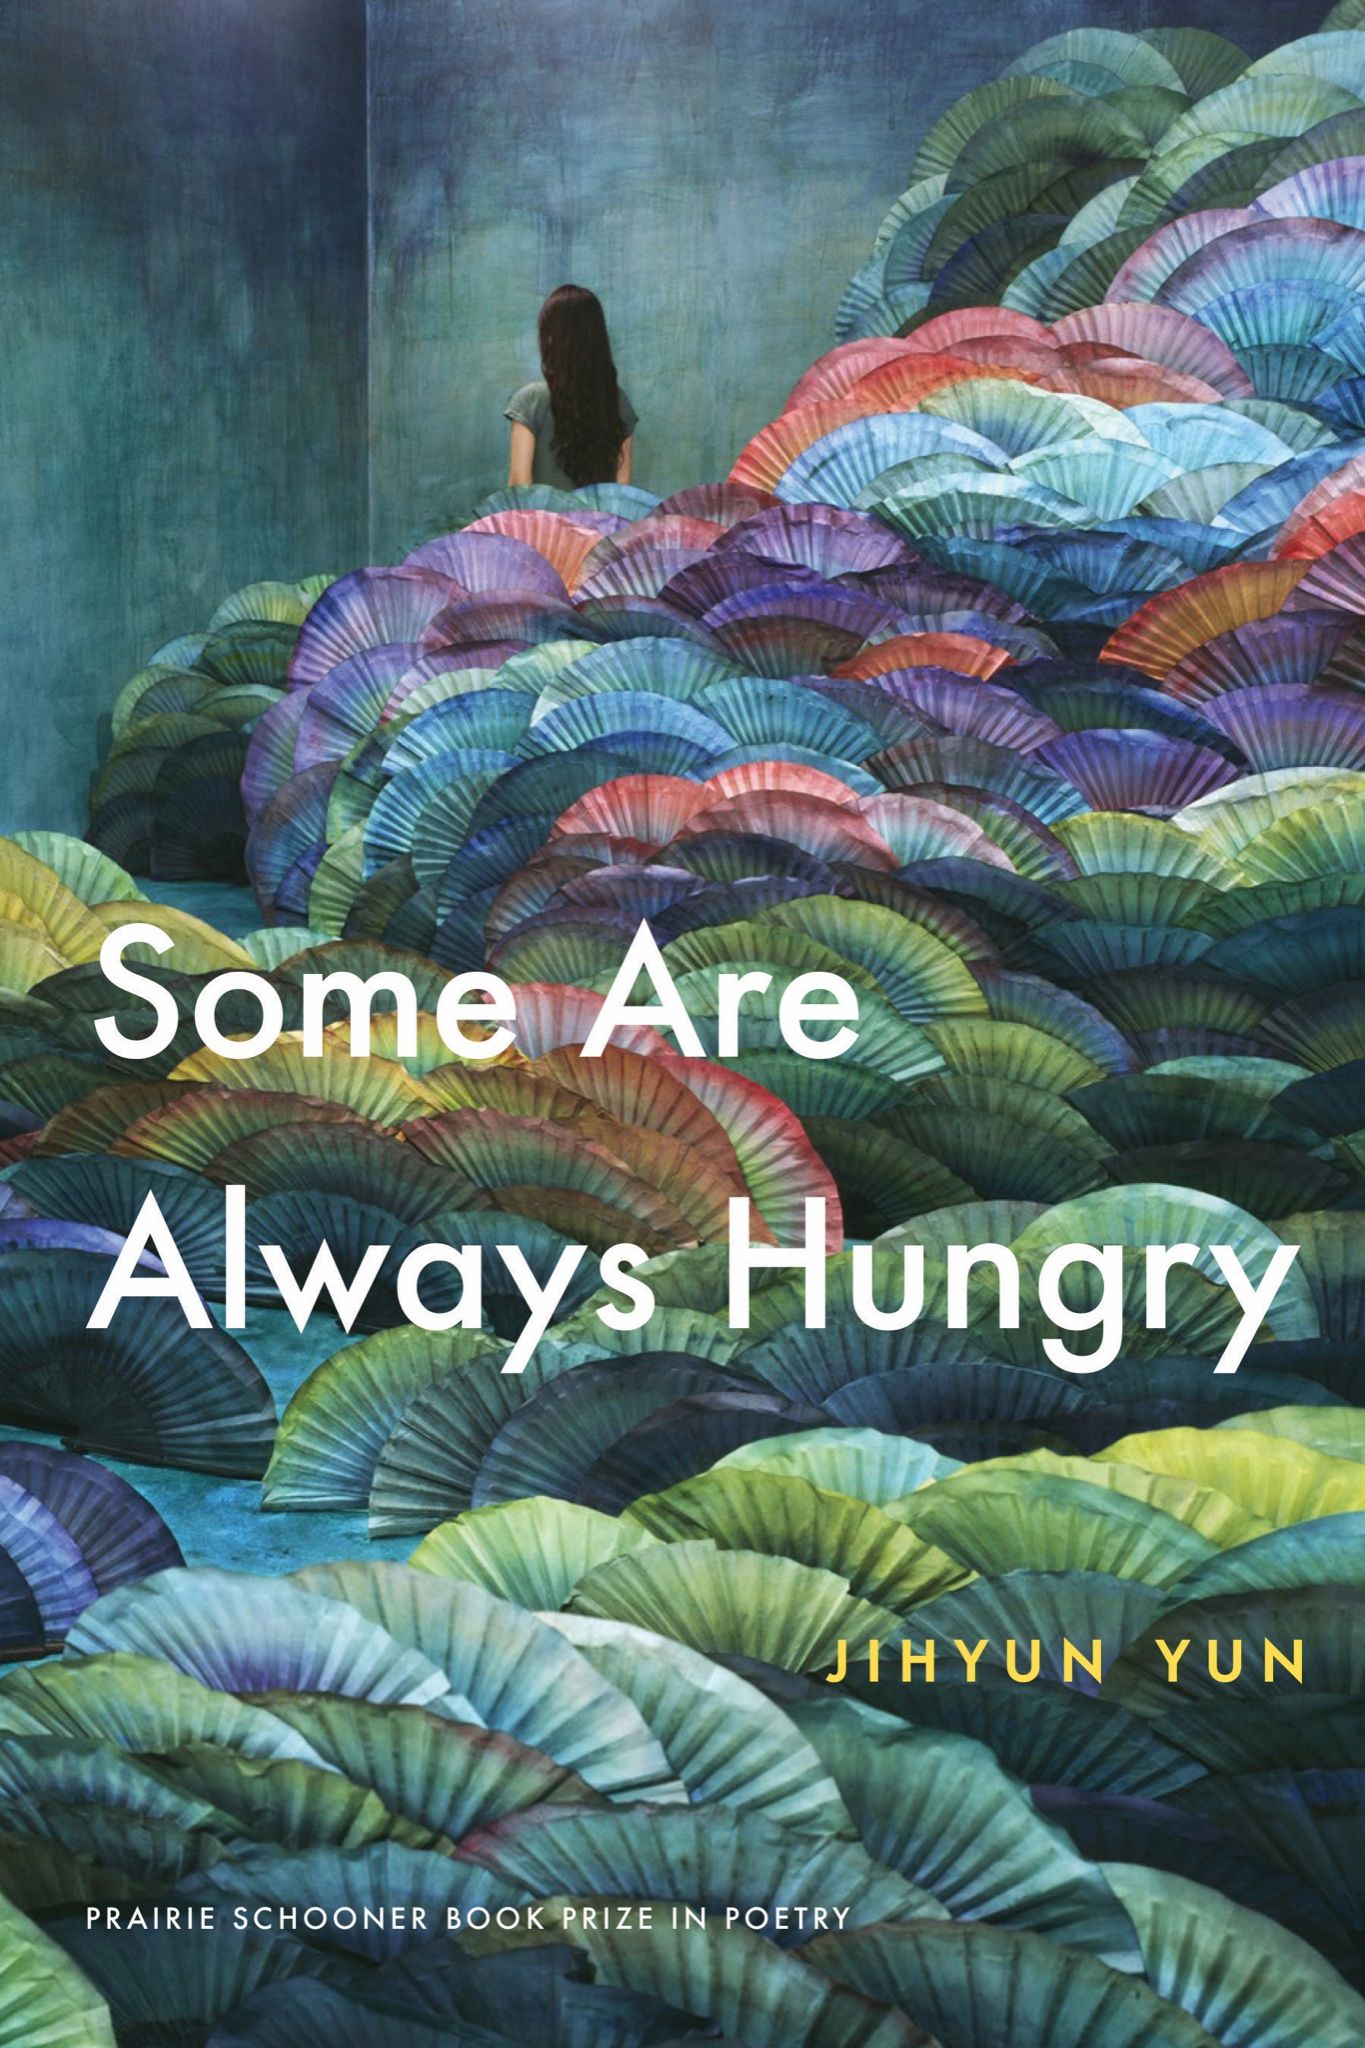 Some are Always Hungry by Jihyun Yun